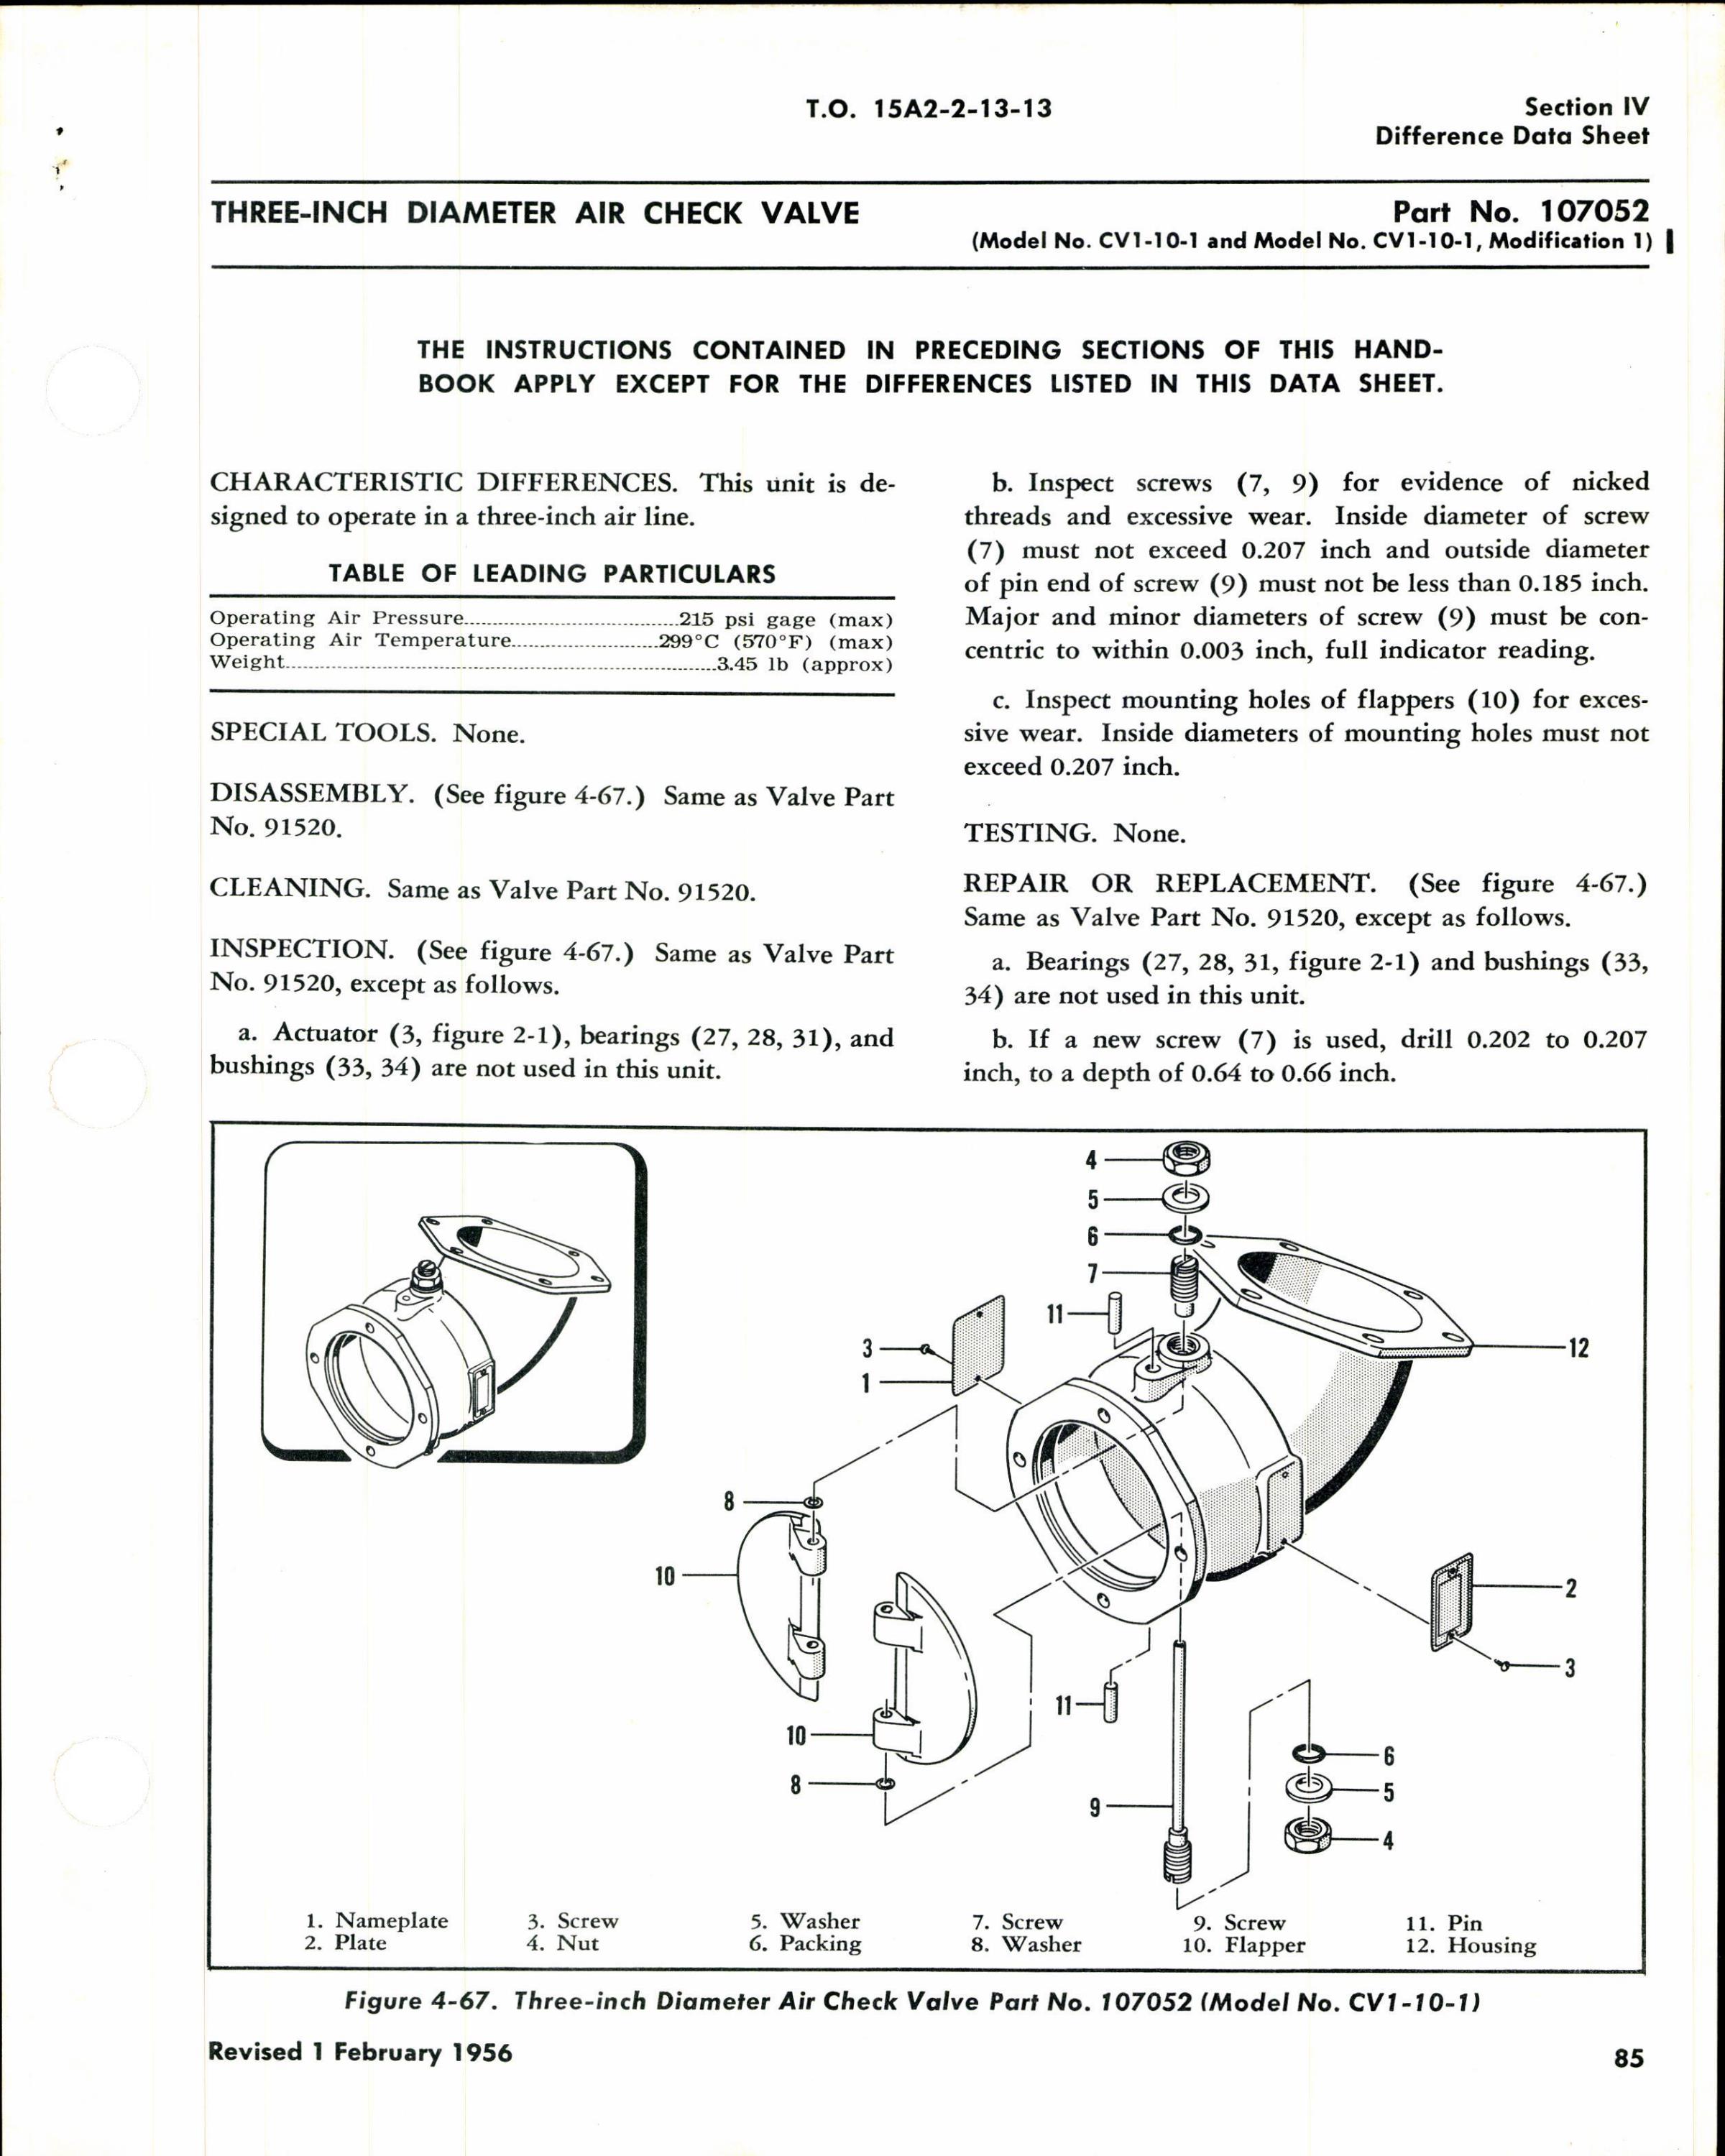 Sample page 5 from AirCorps Library document: Overhaul Instructions for Check and Shutoff Valves